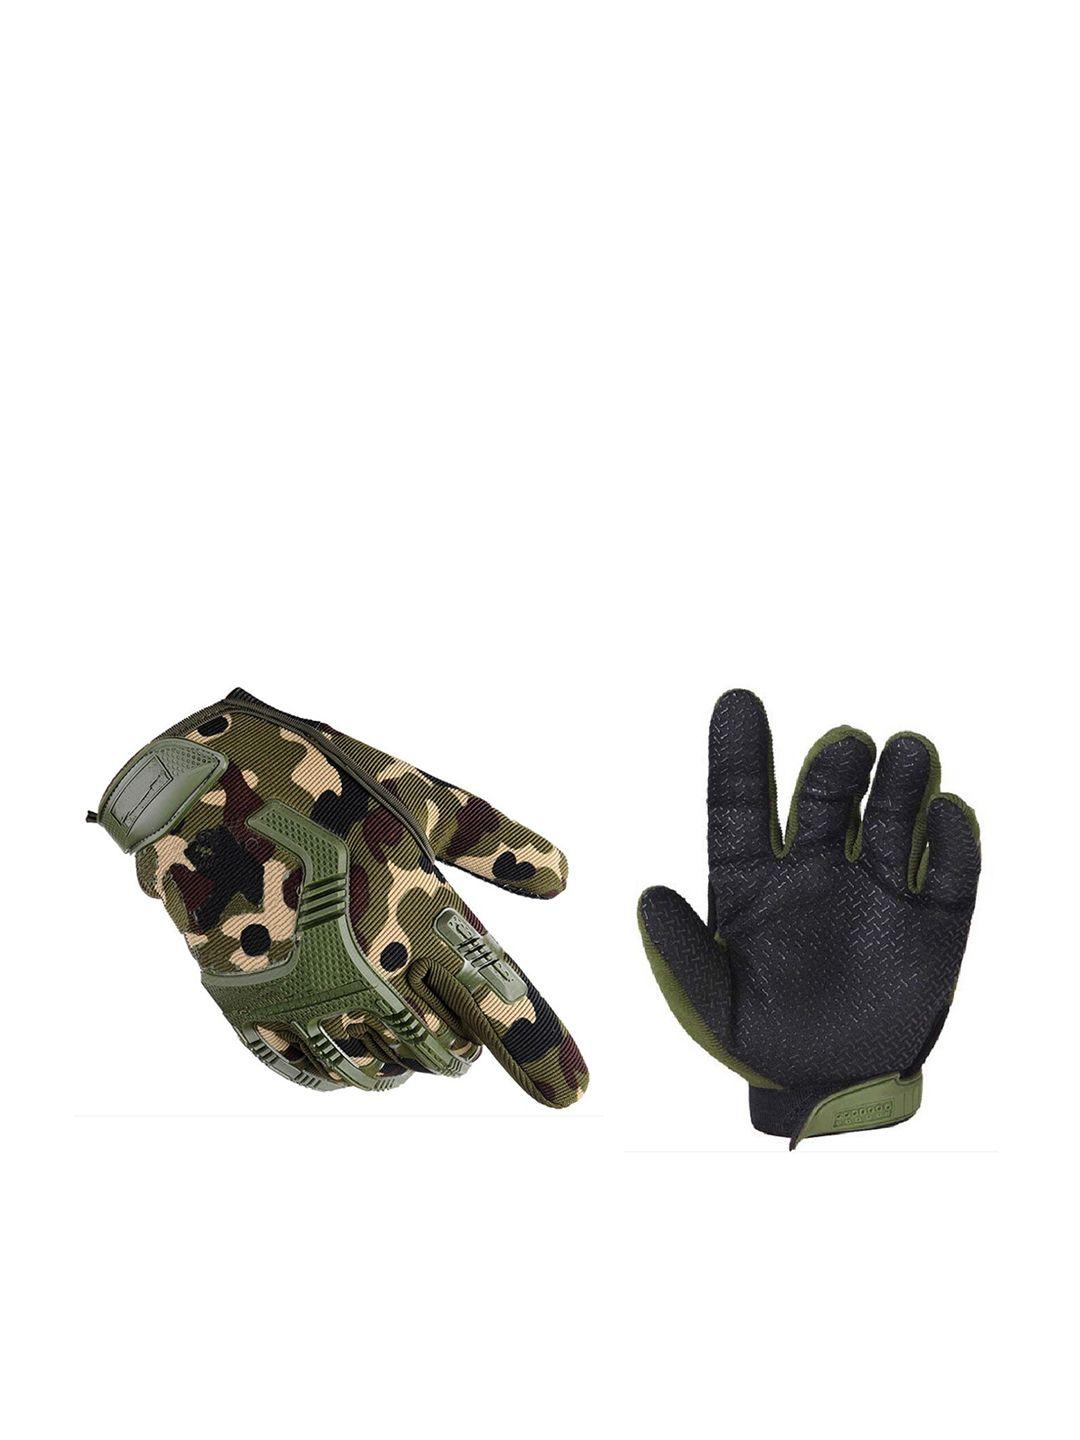 alexvyan printed anti-skid snuggly-fit full finger sports gloves